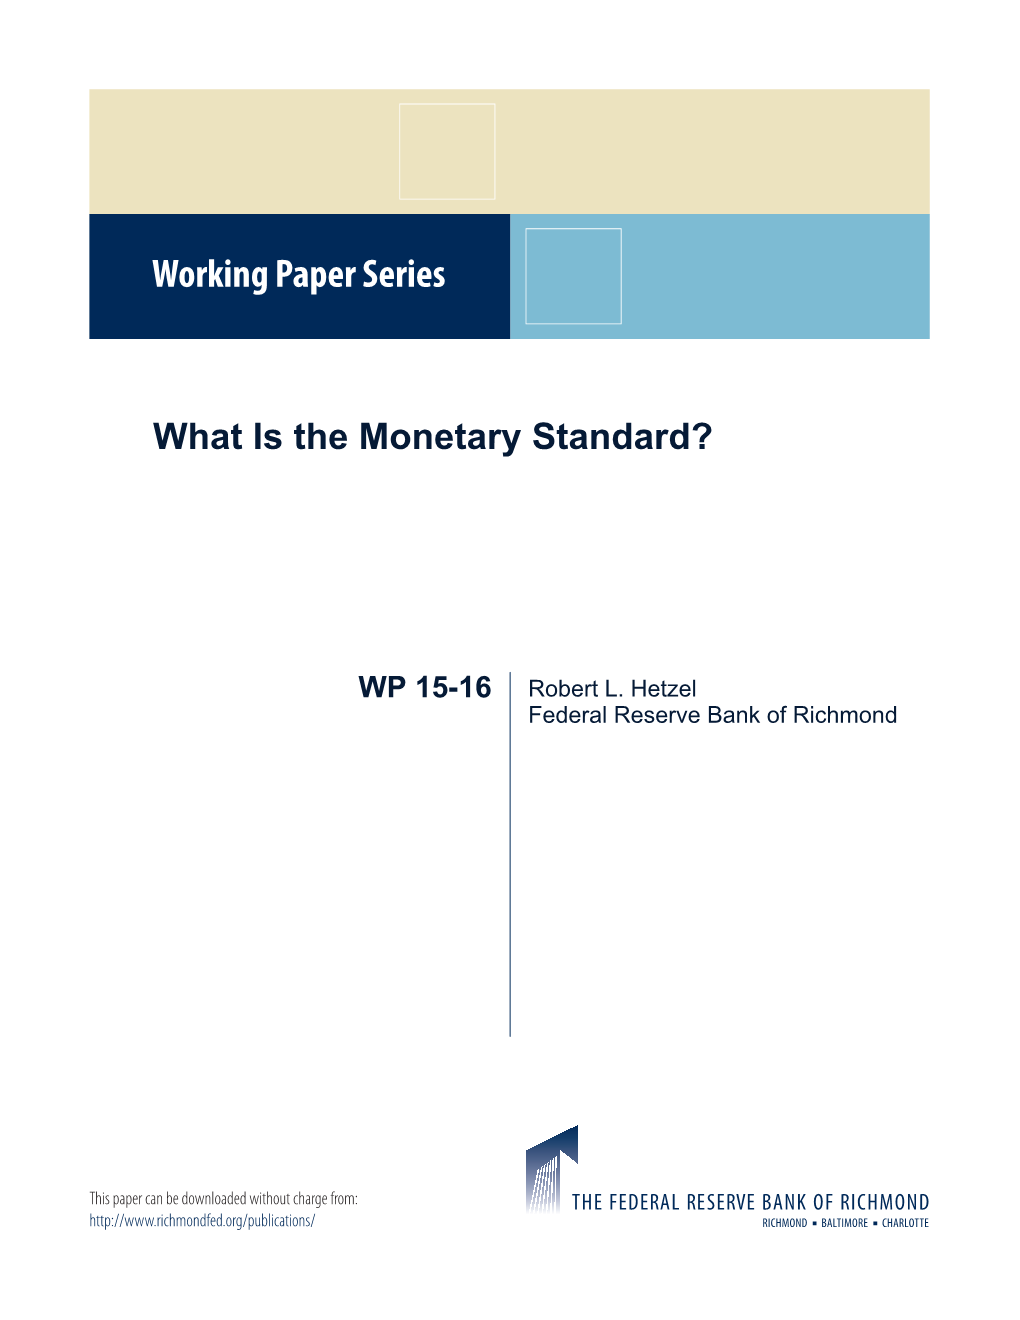 What Is the Monetary Standard?